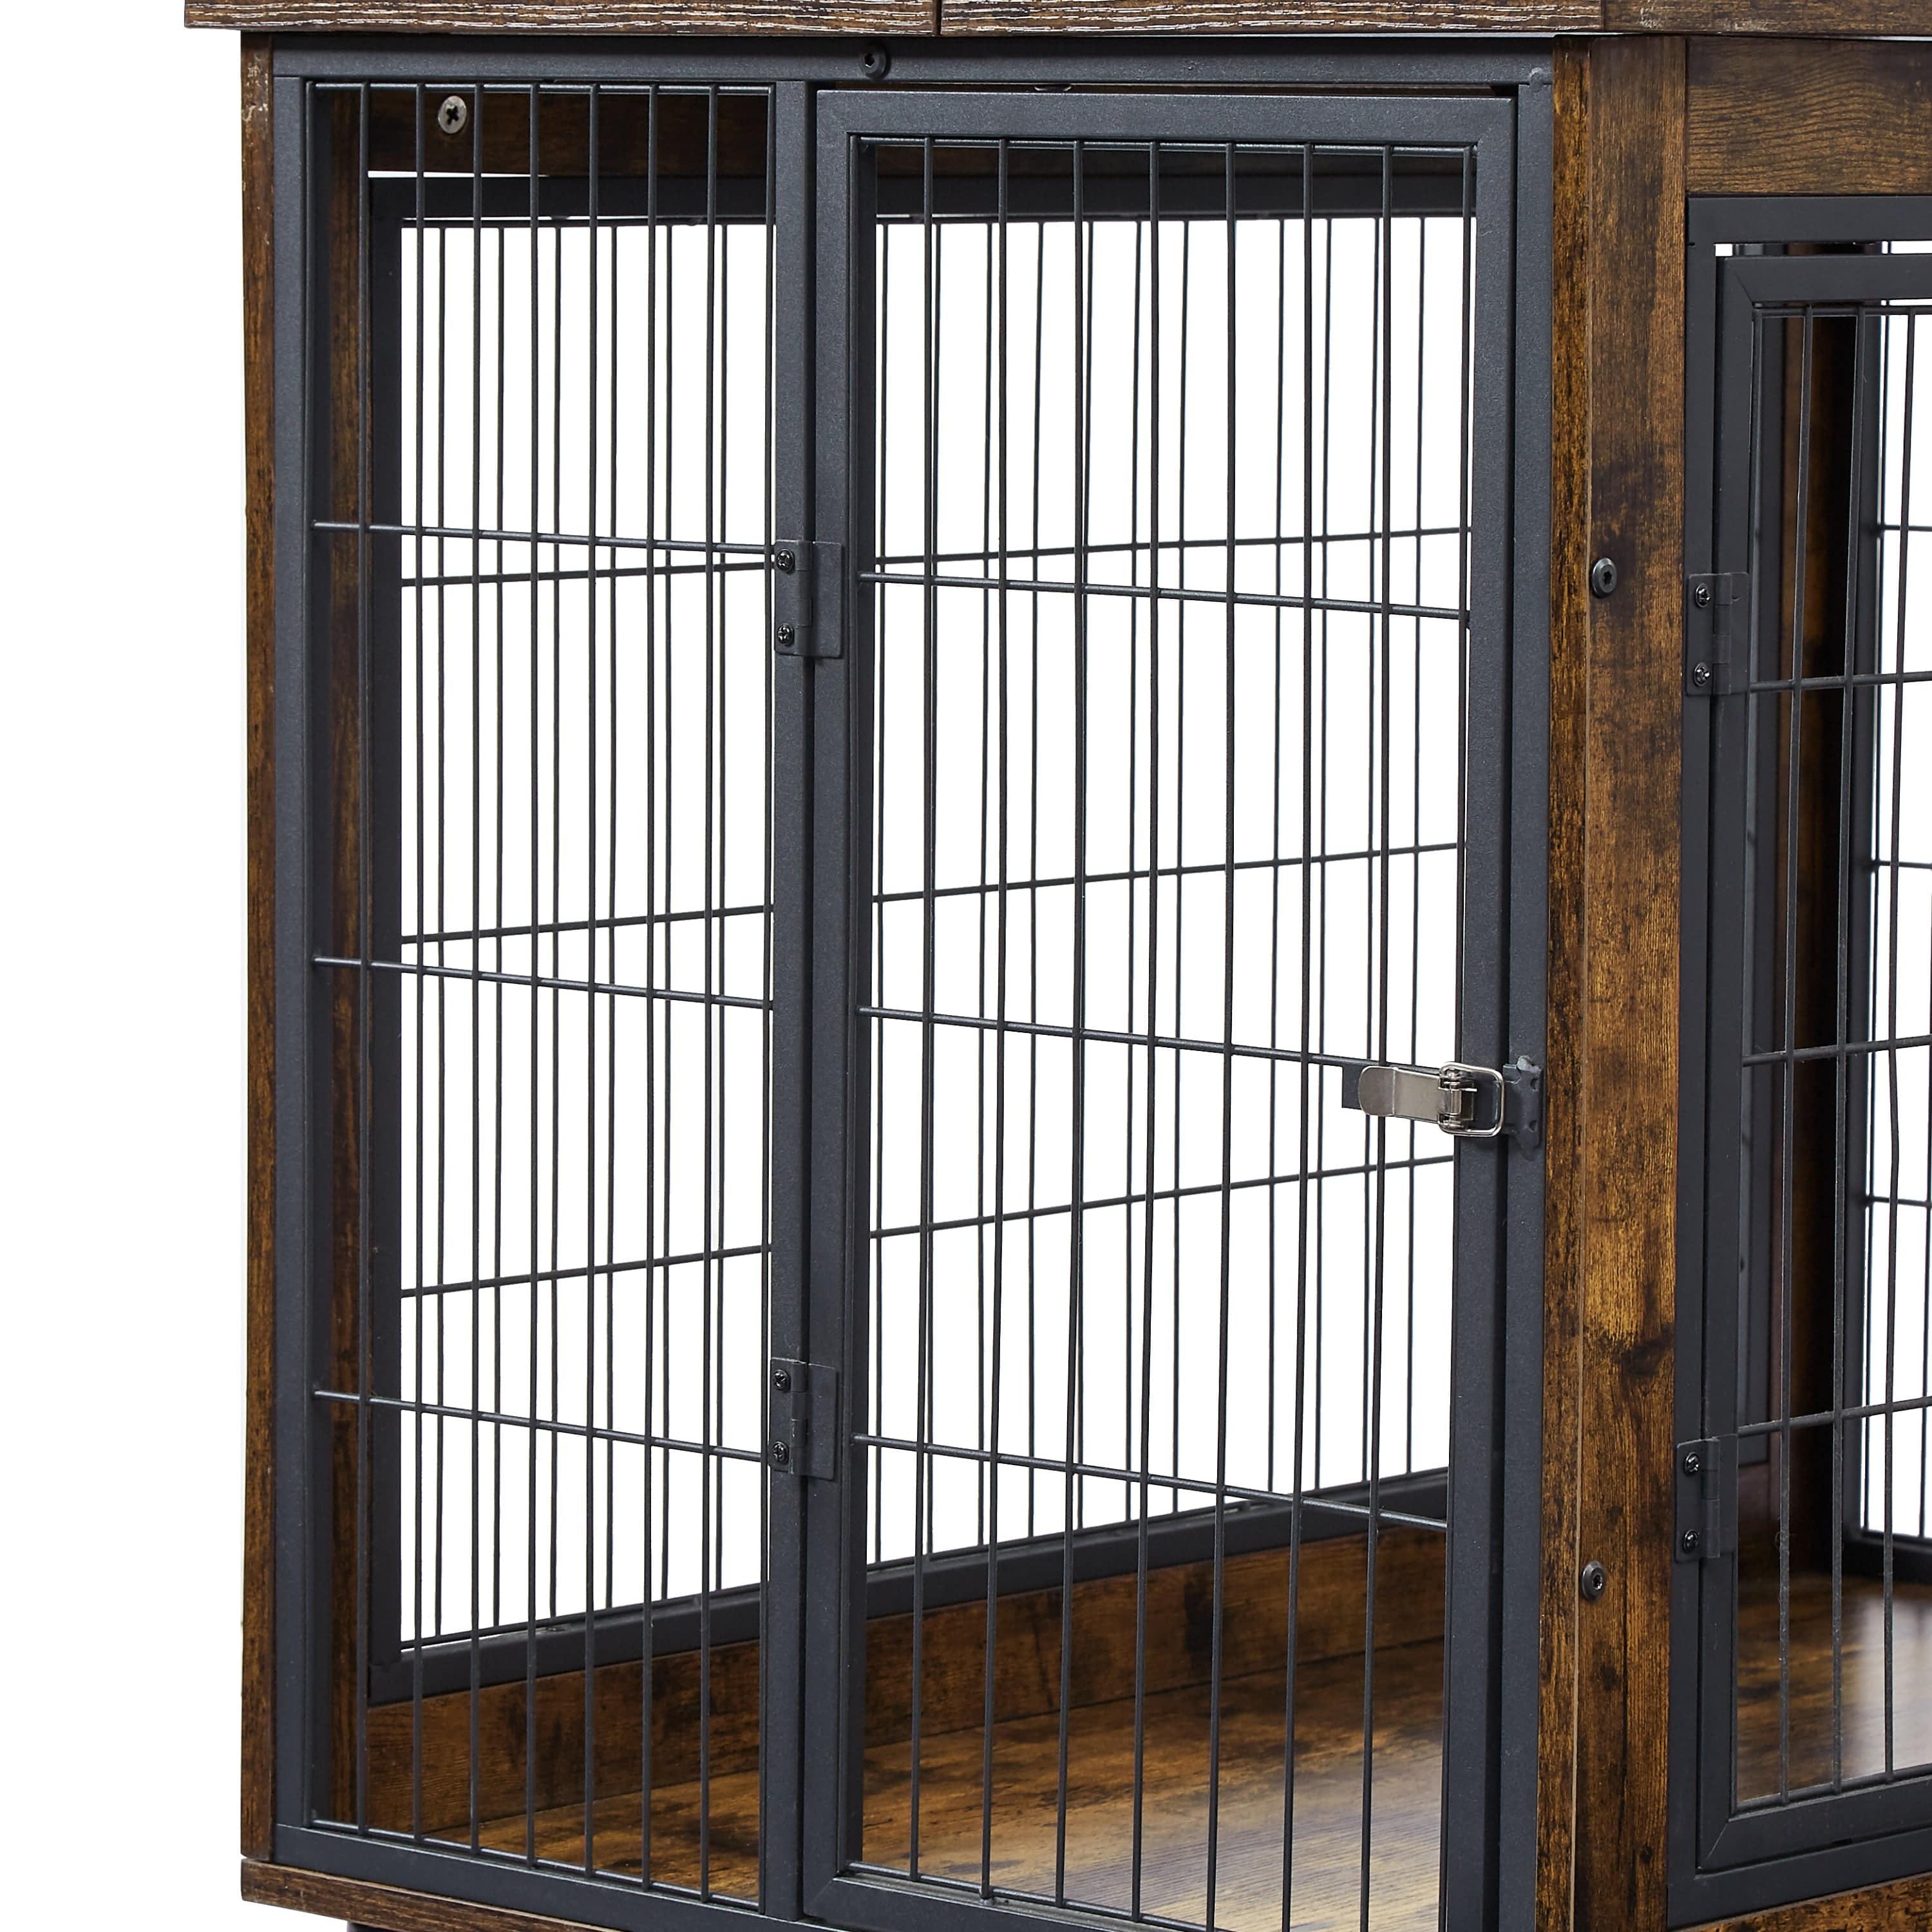 Shop JHX Furniture Dog Cage Crate with Double Doors on Casters（Rustic Brown,31.50''W*22.05''D*24.8''H） Mademoiselle Home Decor